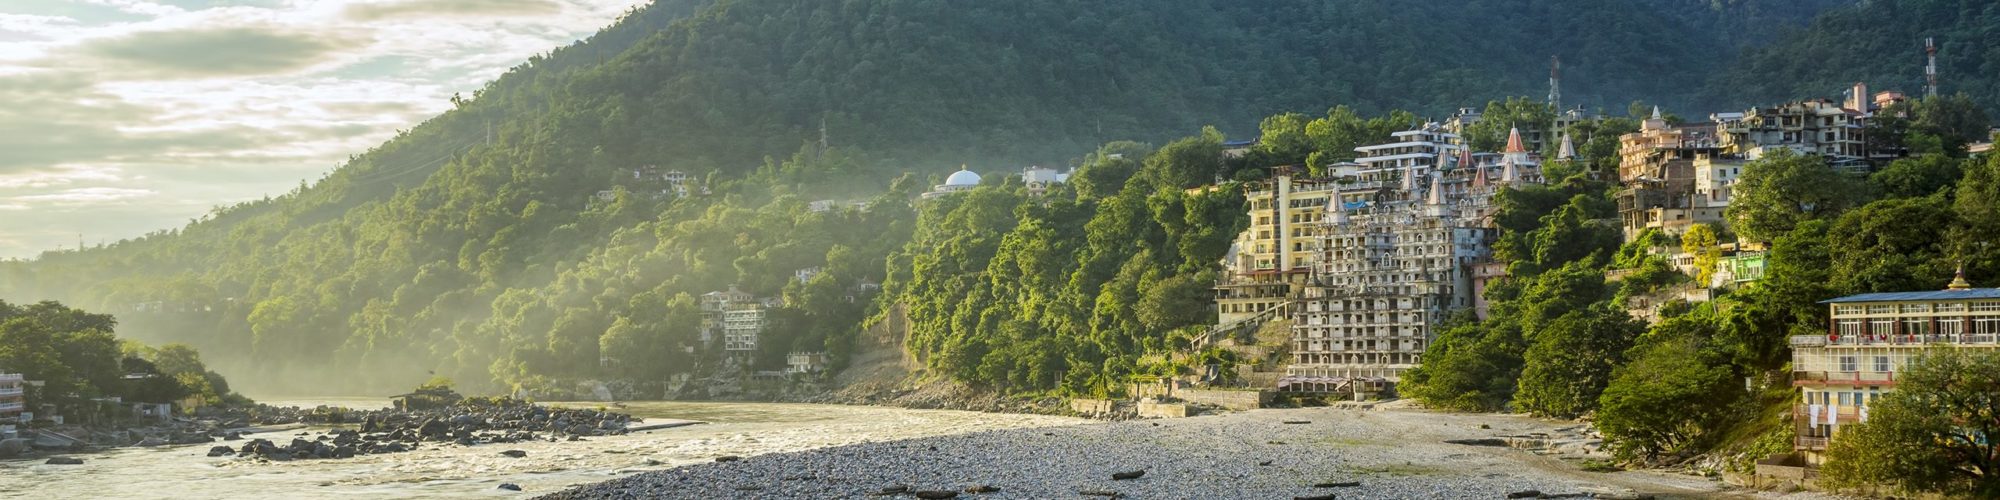 Rishikesh travel agents packages deals